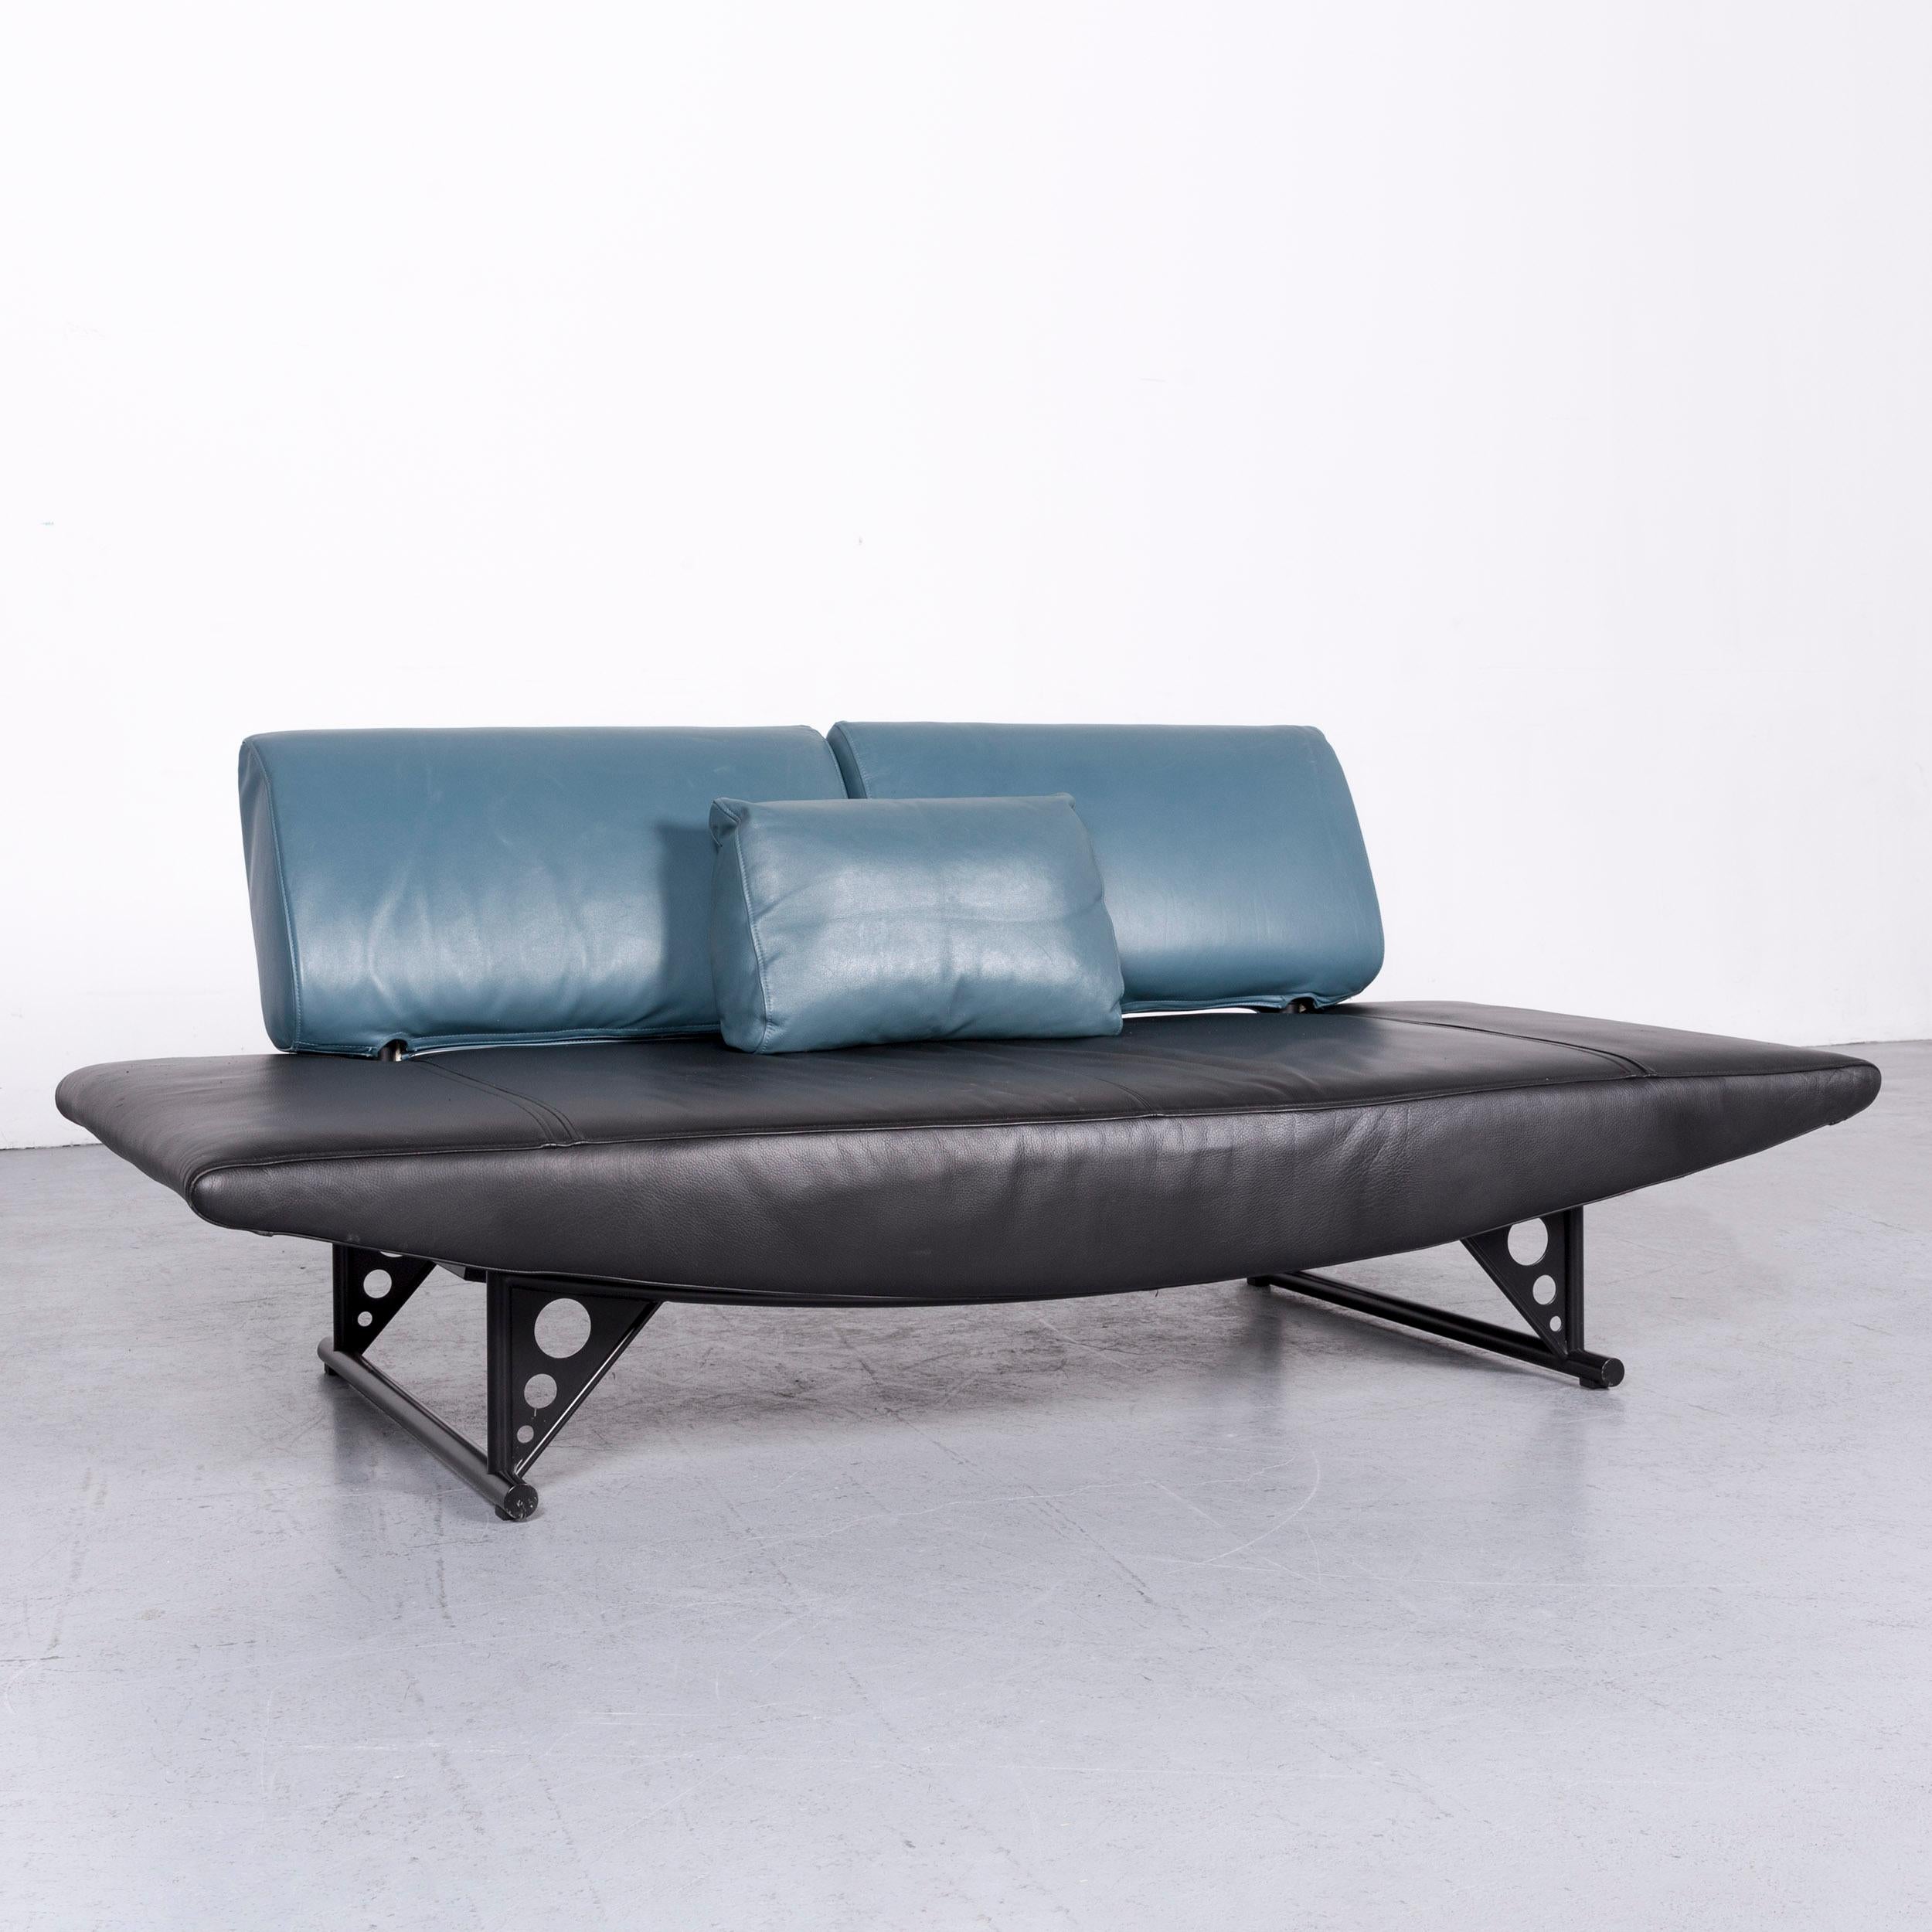 COR cirrus designer sofa black leather function modern made in Germany, with convenient functions, made for pure comfort and flexibility.